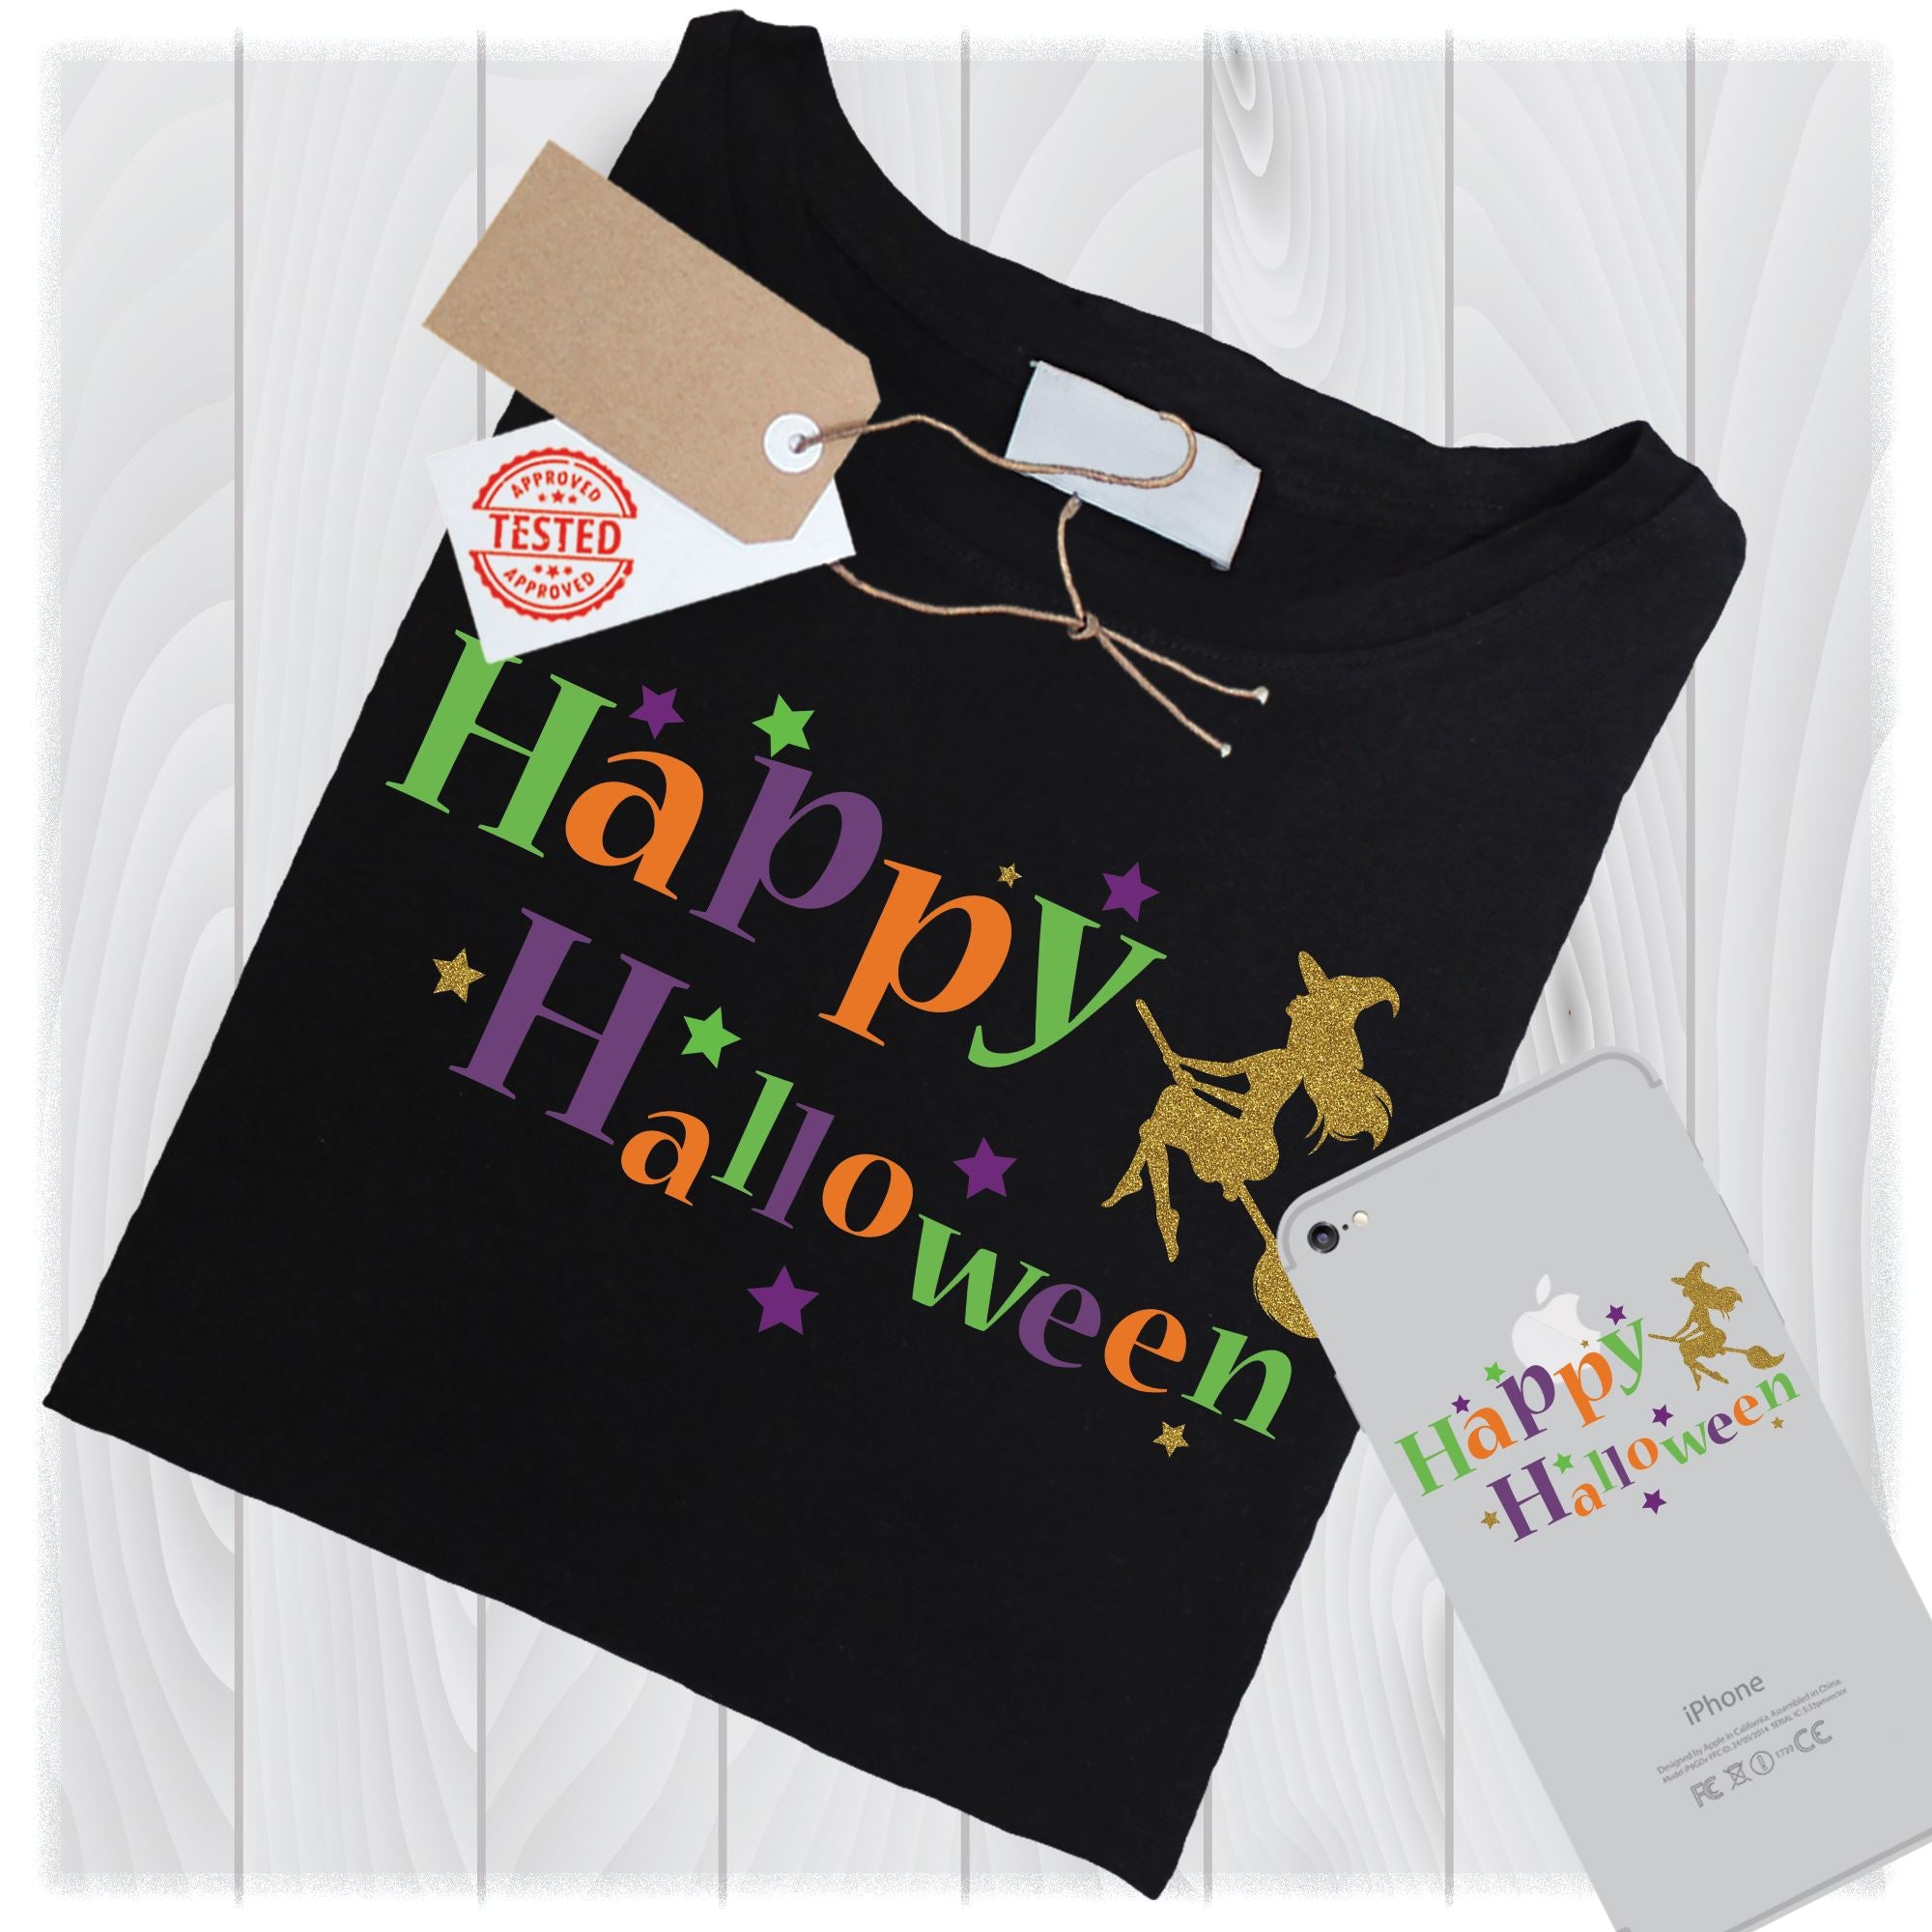 Download Happy Halloween Svg Files For Cricut Designs Witch Svg Halloween Clip Art Halloween Cricut Halloween Png Halloween Shirt Svg Designs So Fontsy